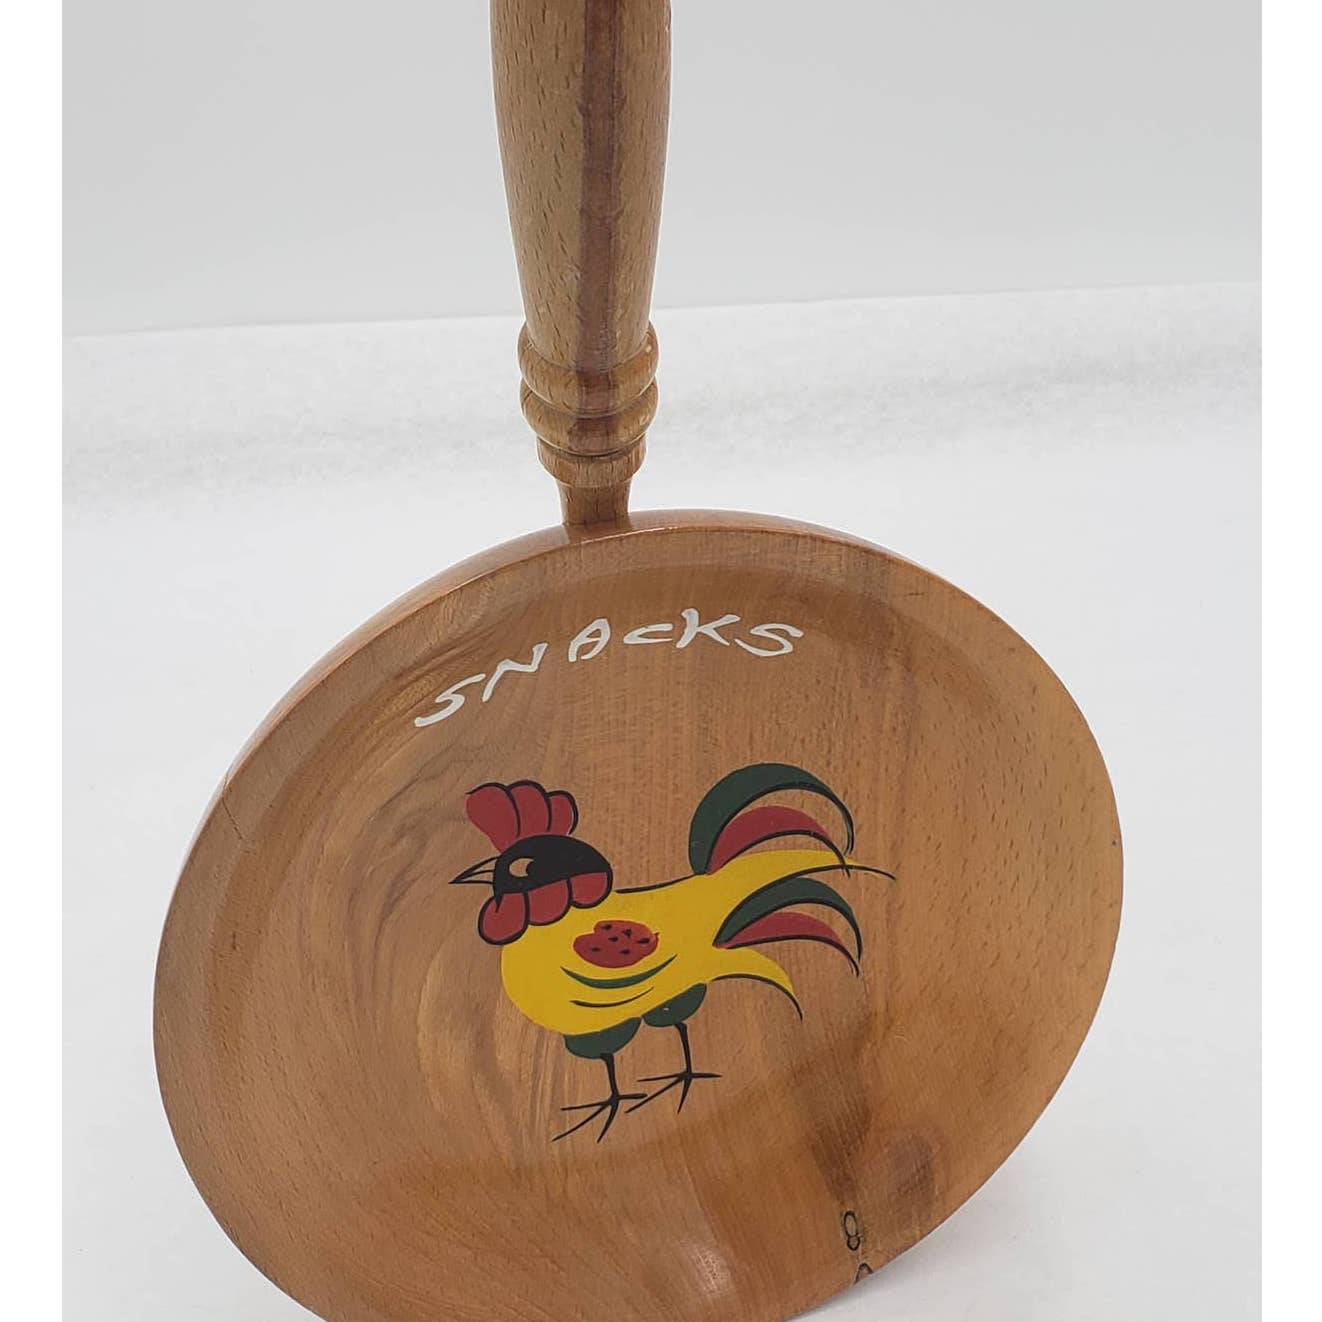 Japanese Rooster Snack Wooden Kitchen Wall Art Decorative 10"